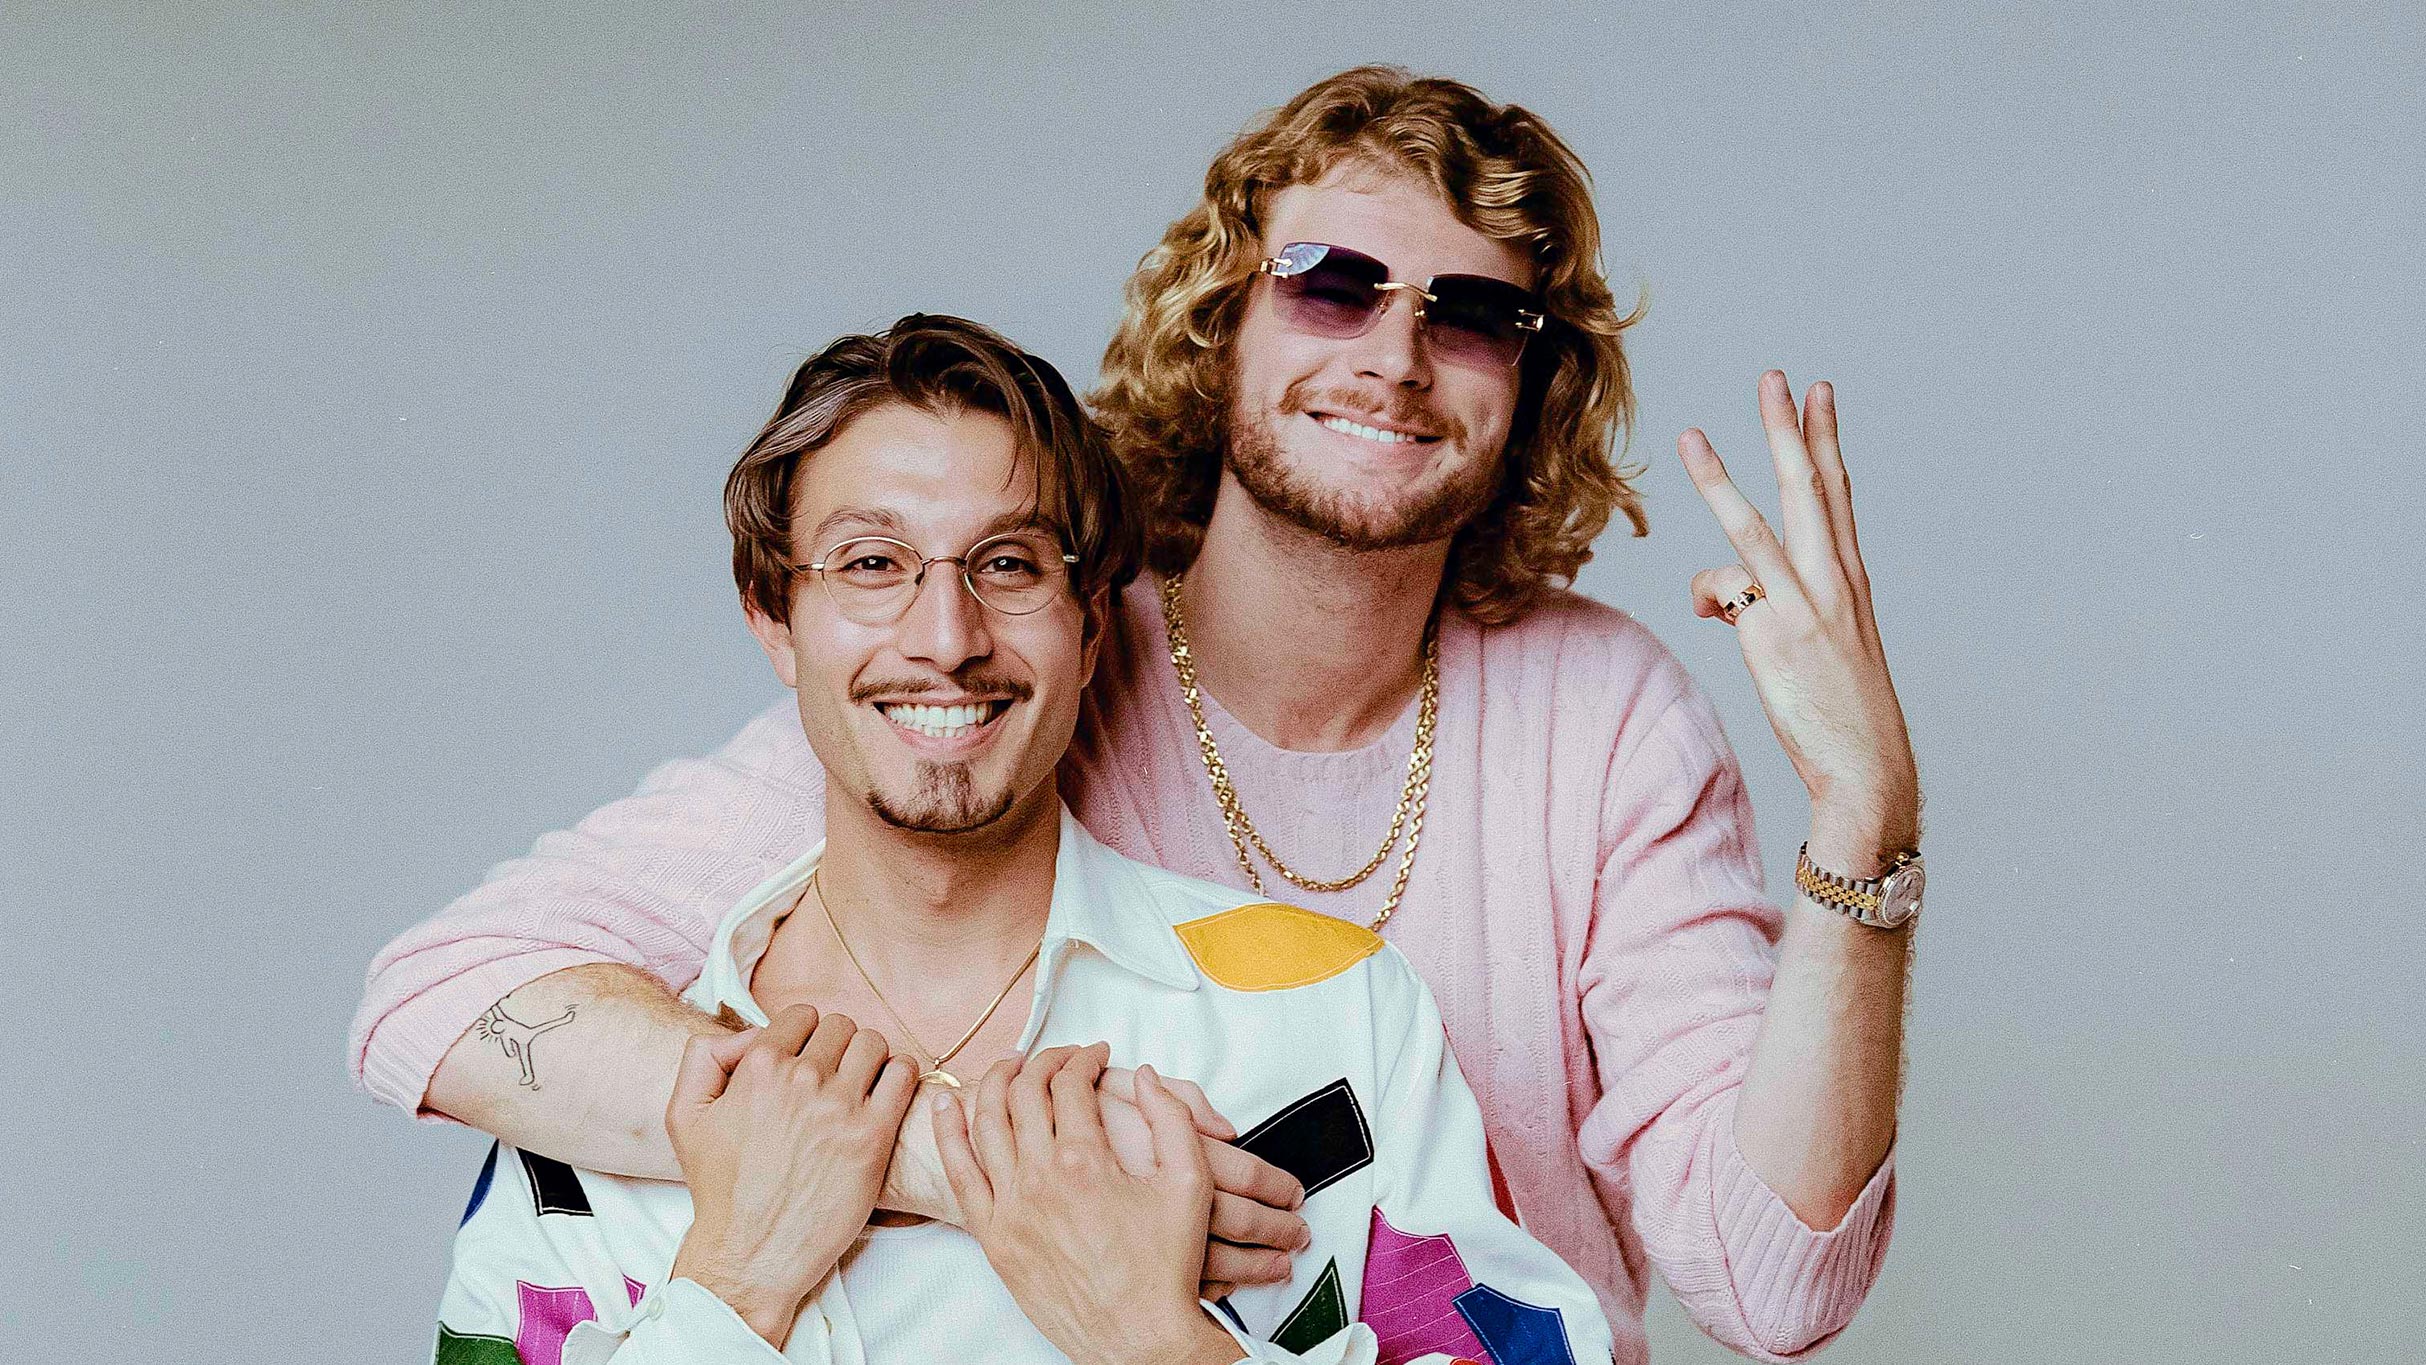 Baby Gravy (Yung Gravy & bbno$)  in West Melbourne promo photo for Live Nation presale offer code